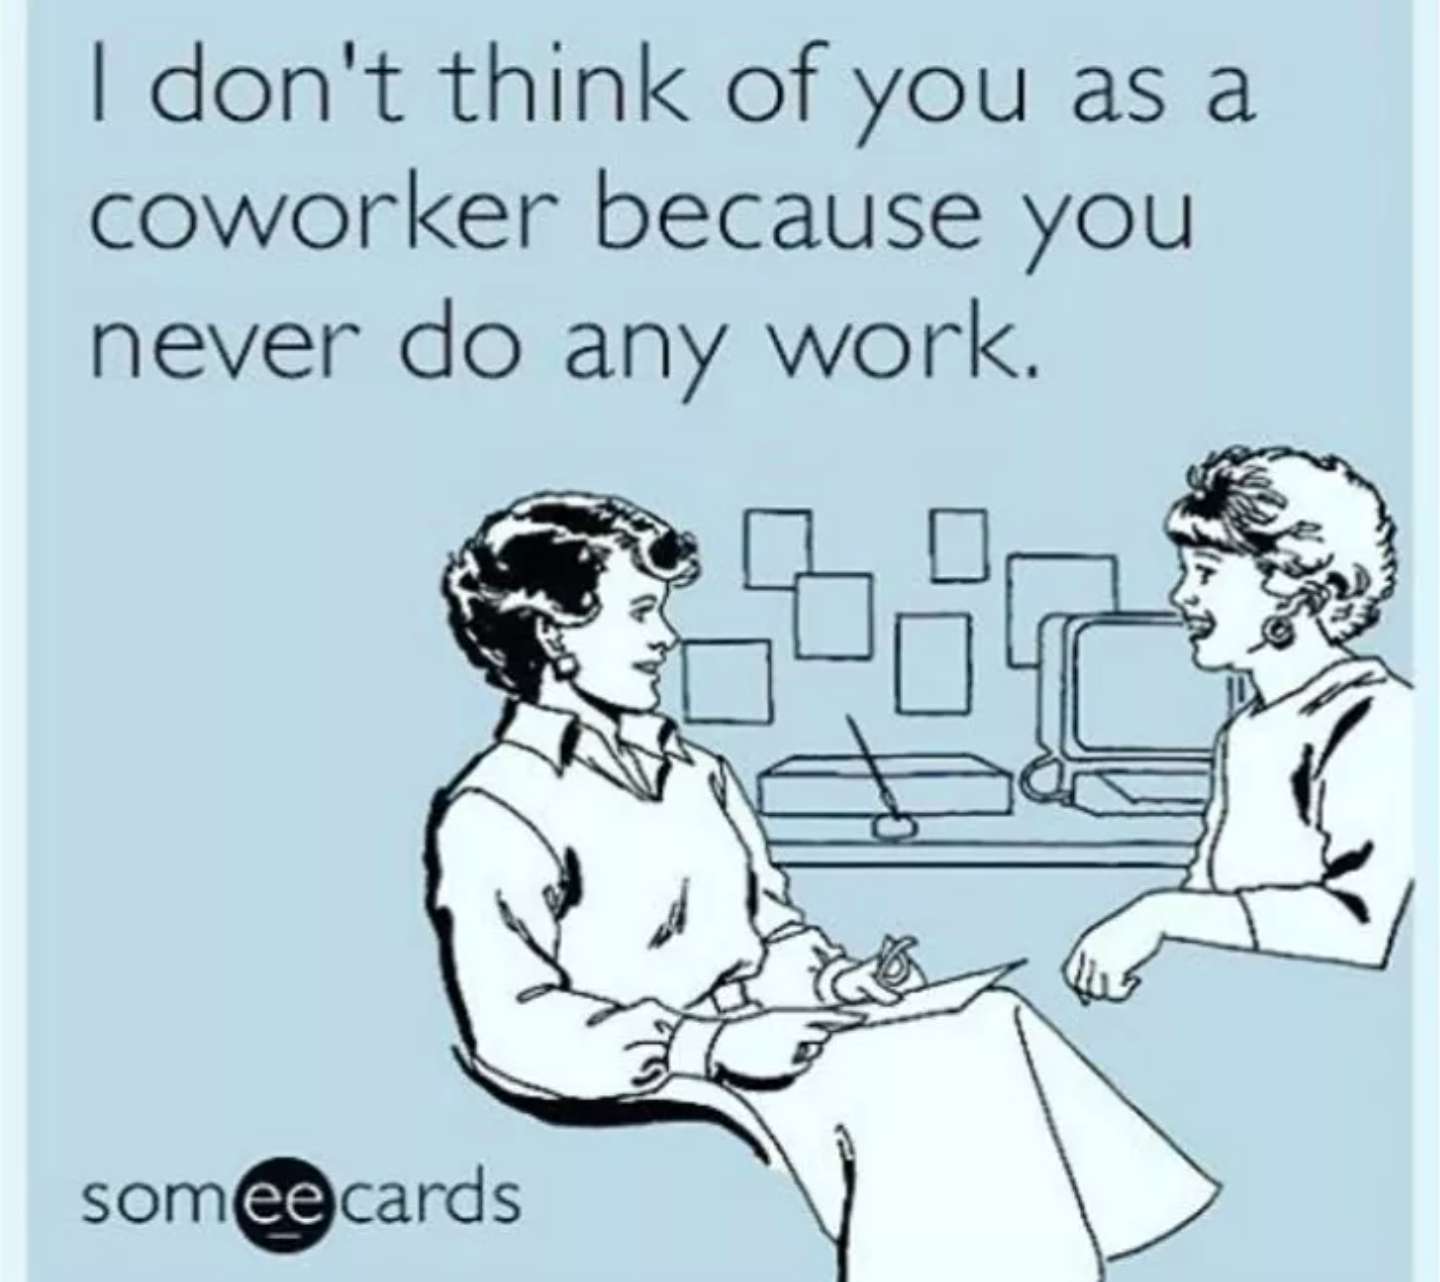 I don't think of you as a coworker because you never do any work.